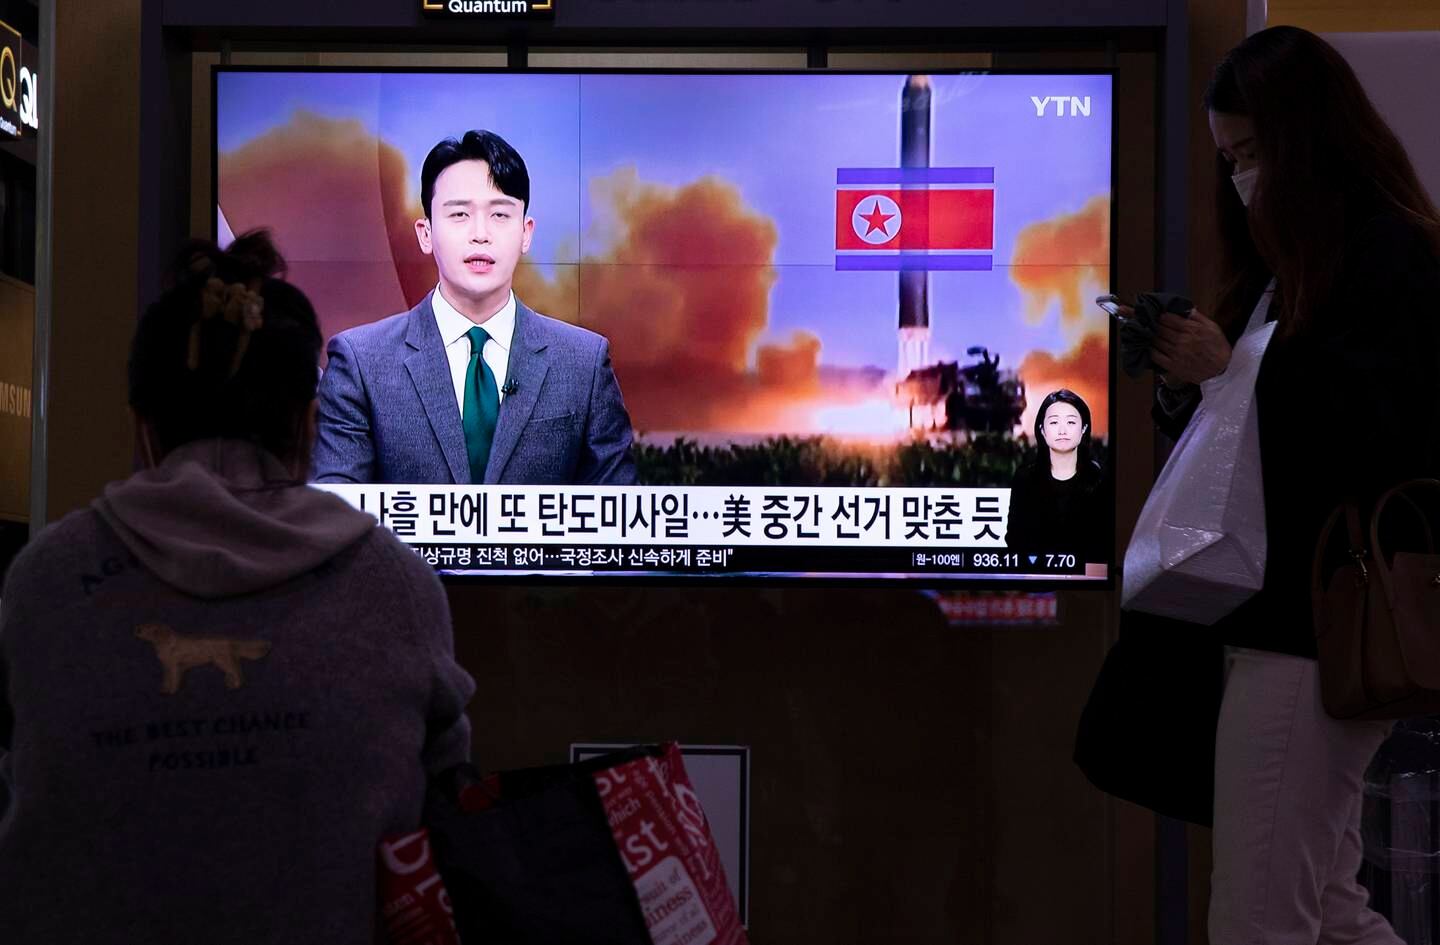 People watch the news at a station in Seoul, South Korea, last week, after North Korea reportedly launched ballistic missiles into the East Sea. EPA